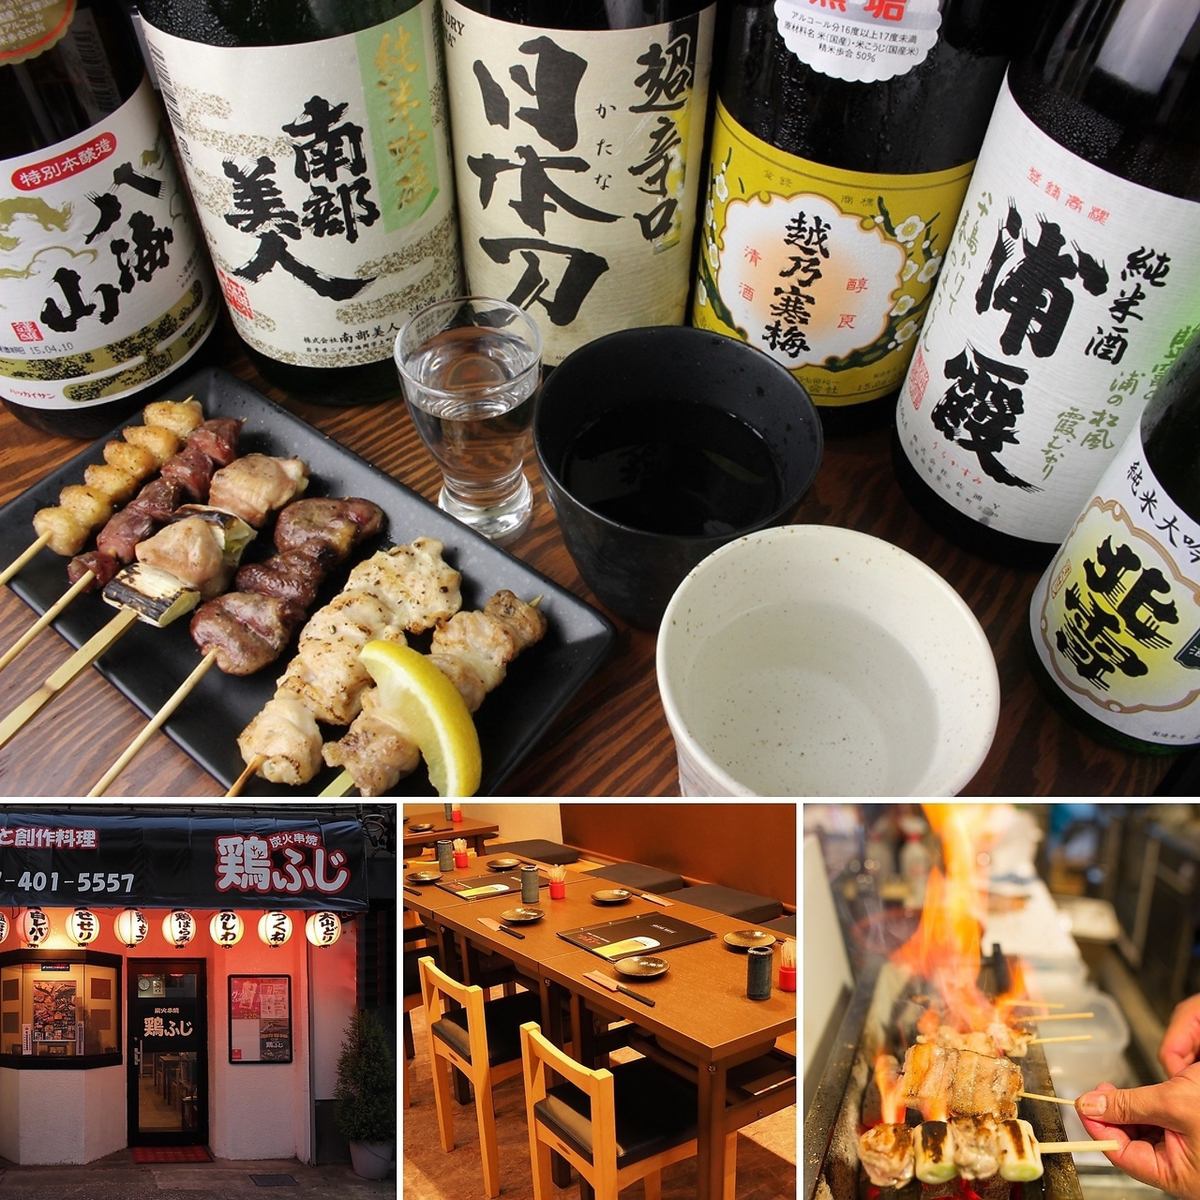 Just a short walk from Keisei Funabashi Station! There are special delicious yakitori and sake!